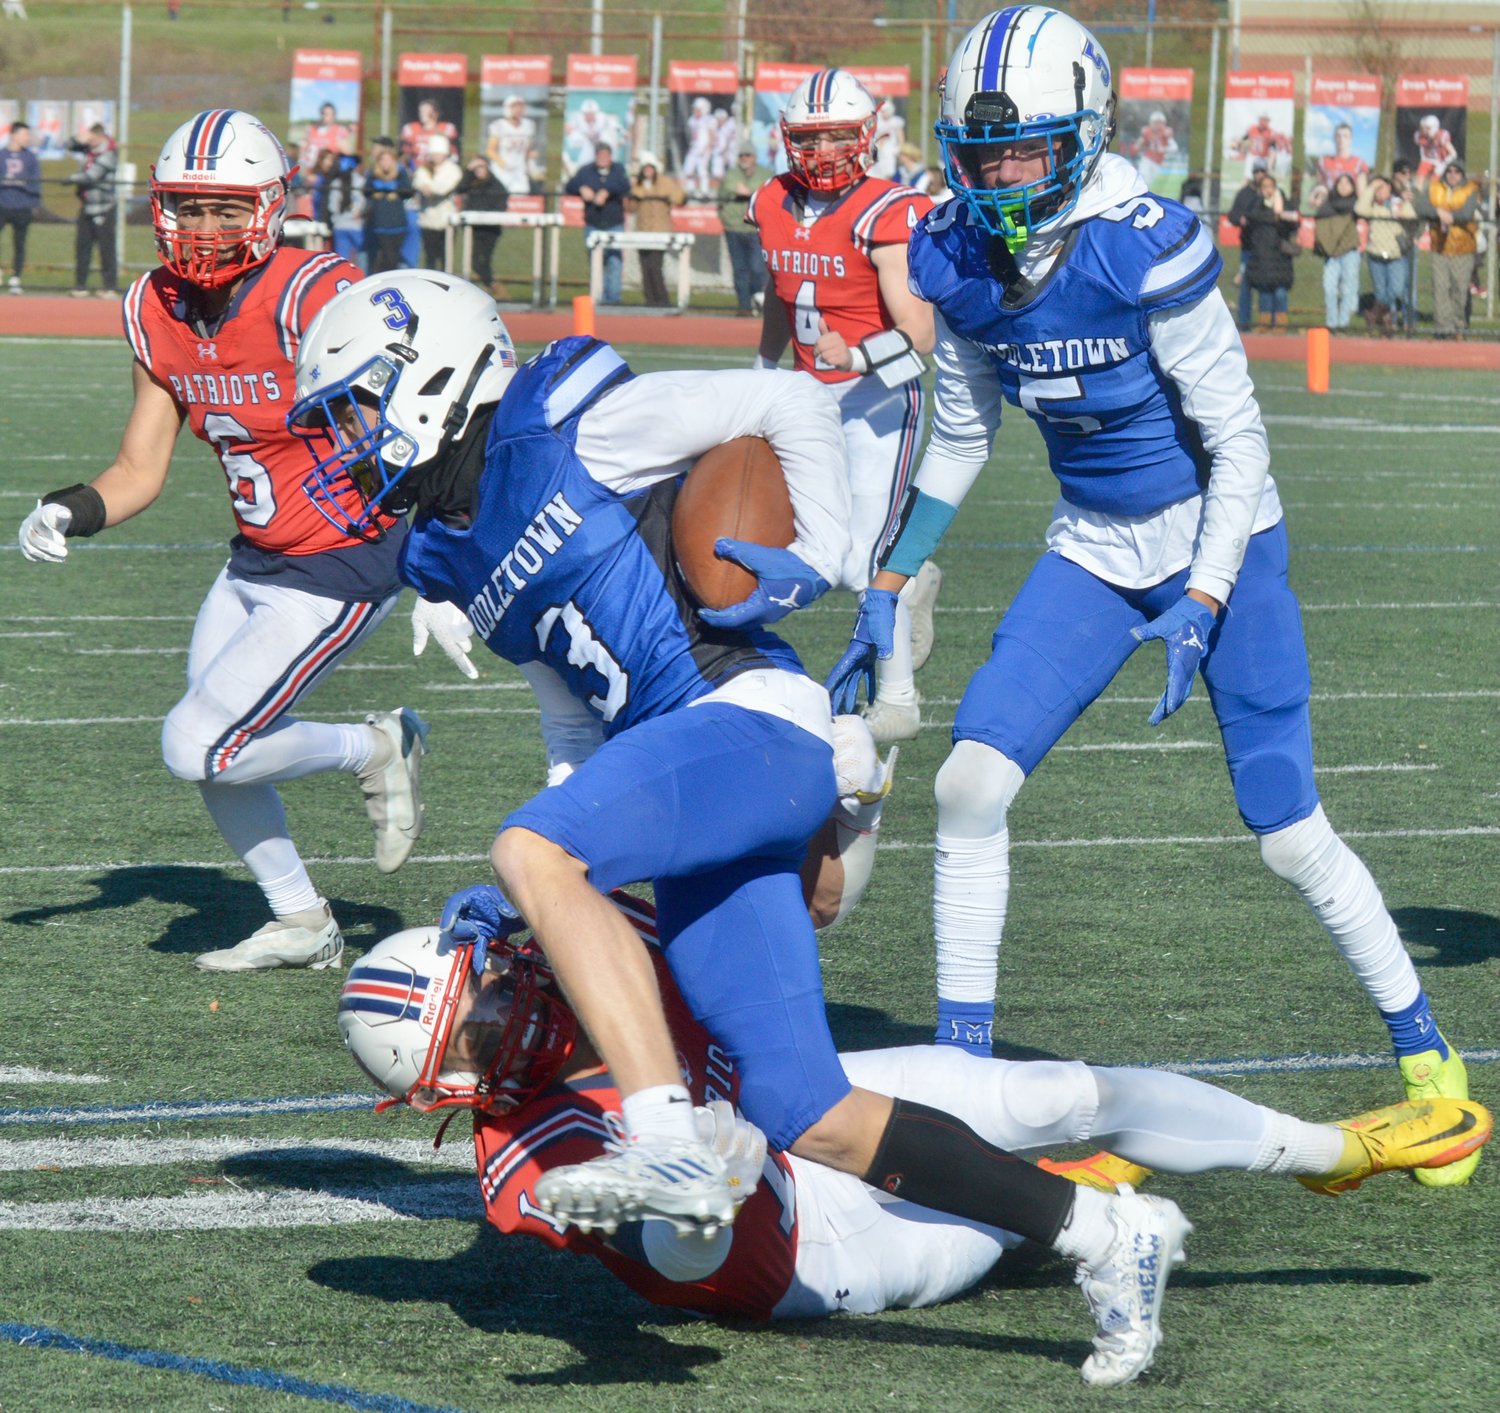 Carson Conheeny (bottom) attempts to bring down Middletown receiver Cameron Miller after a pass play.